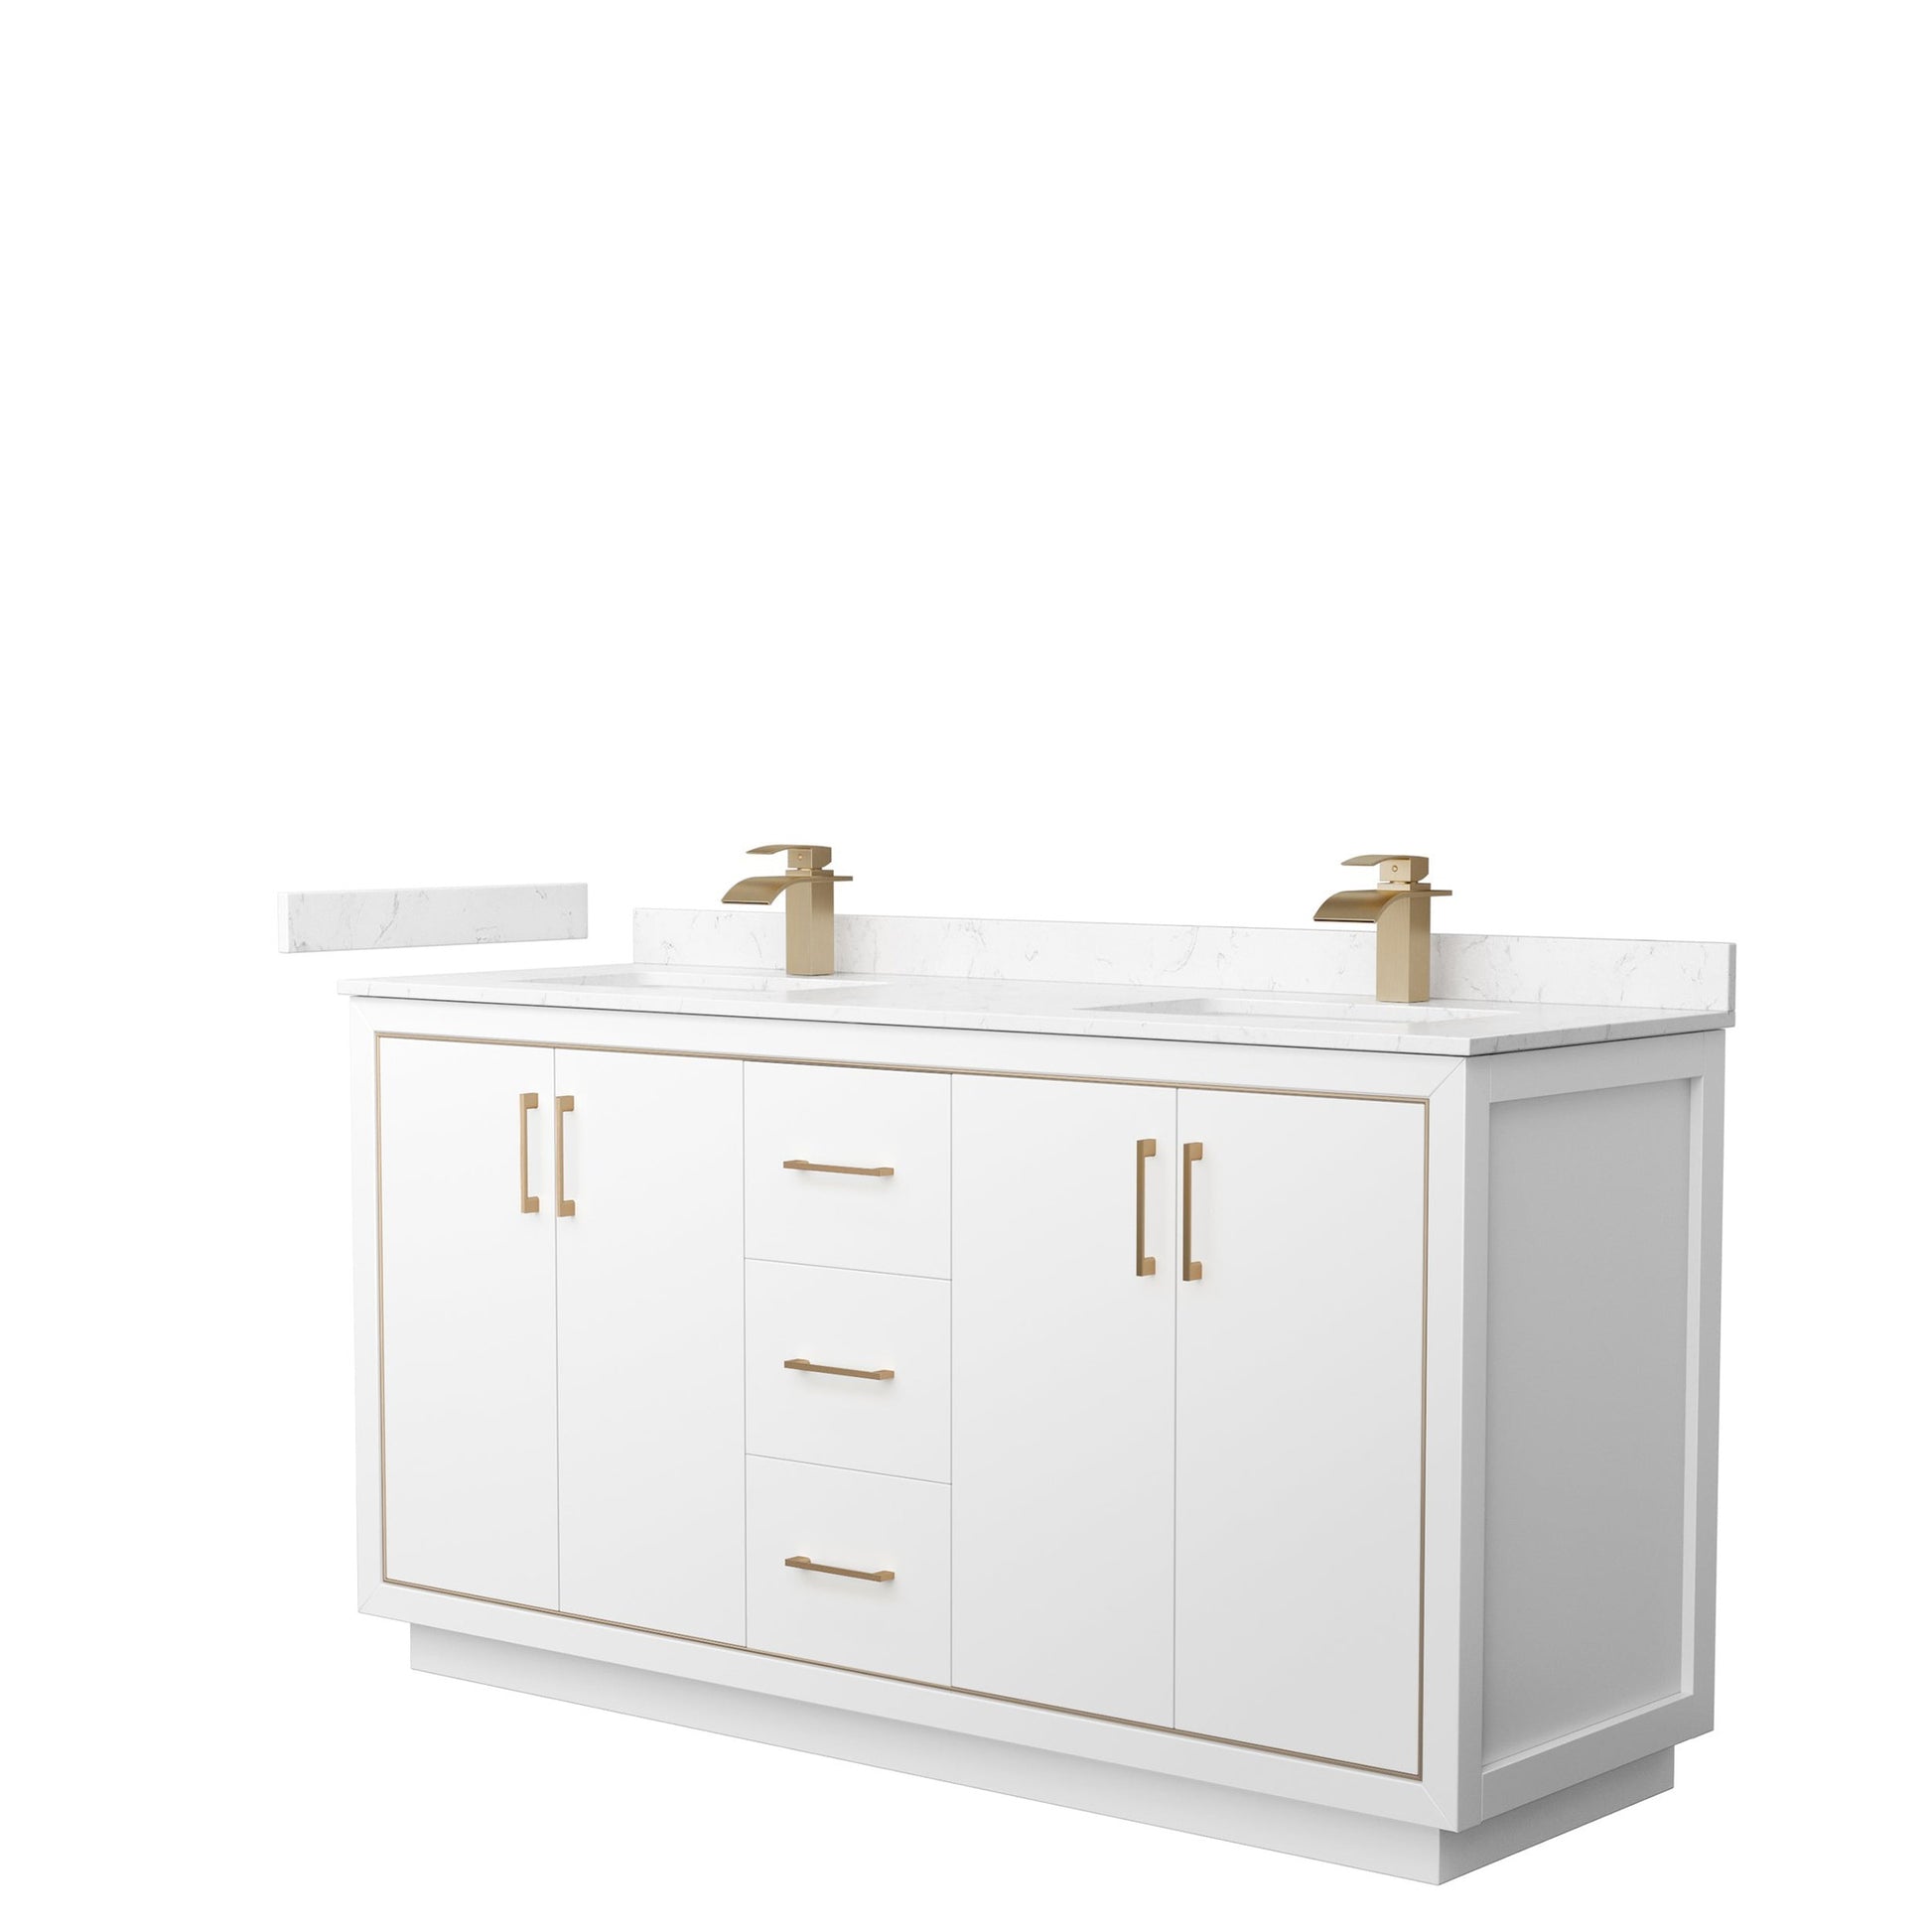 Wyndham Collection Icon 66" Double Bathroom Vanity in White, Carrara Cultured Marble Countertop, Undermount Square Sinks, Satin Bronze Trim